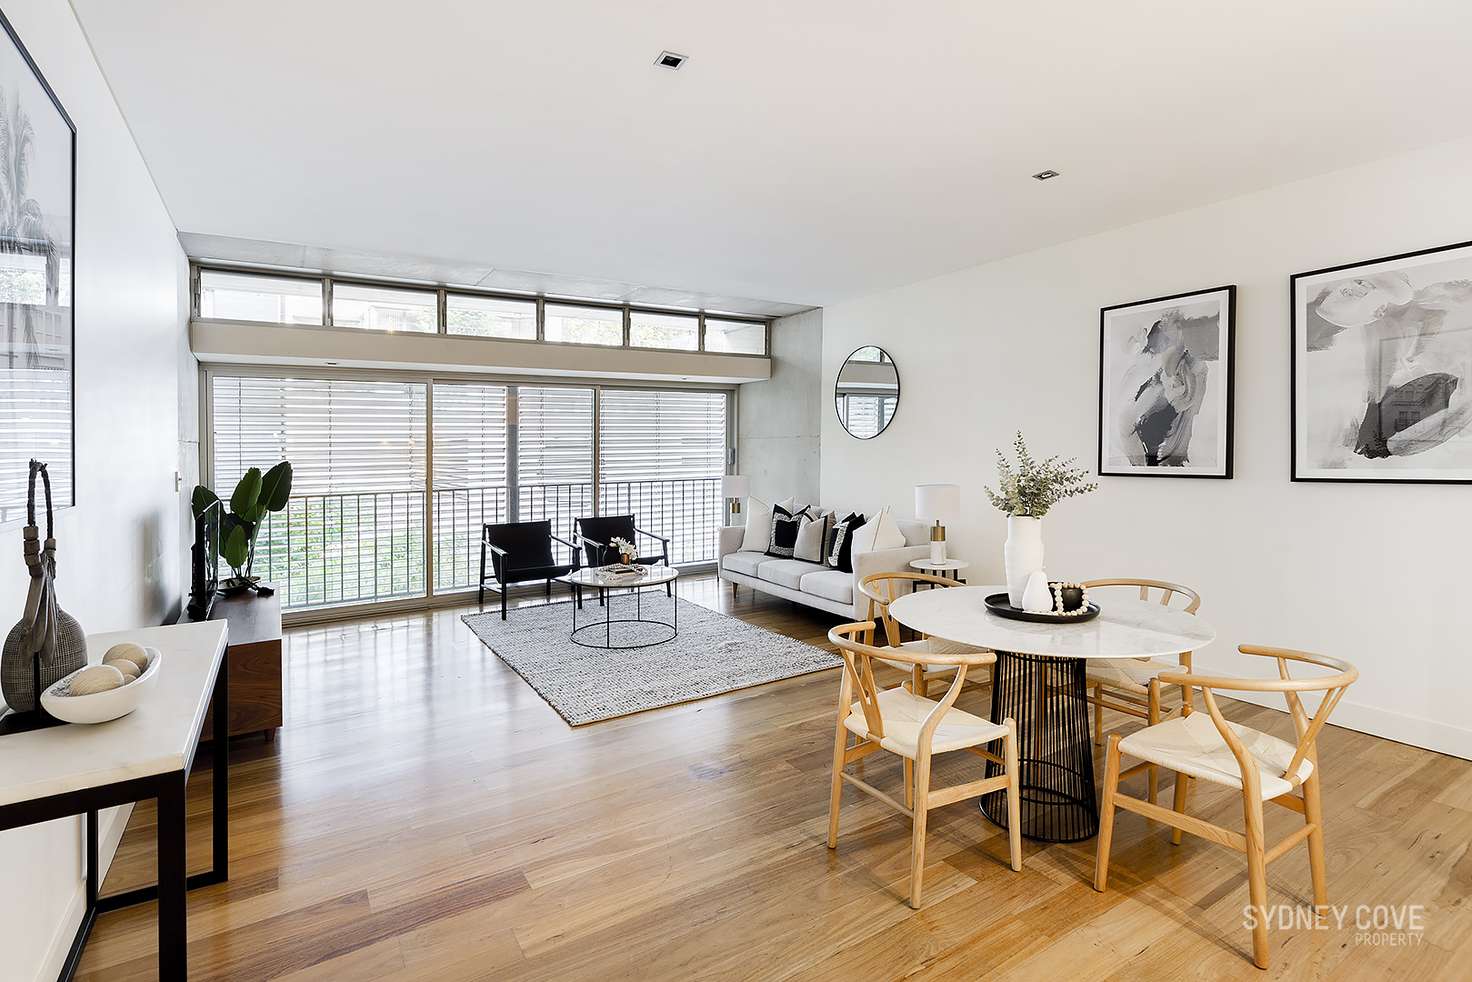 Main view of Homely apartment listing, 21 Brisbane St, Surry Hills NSW 2010